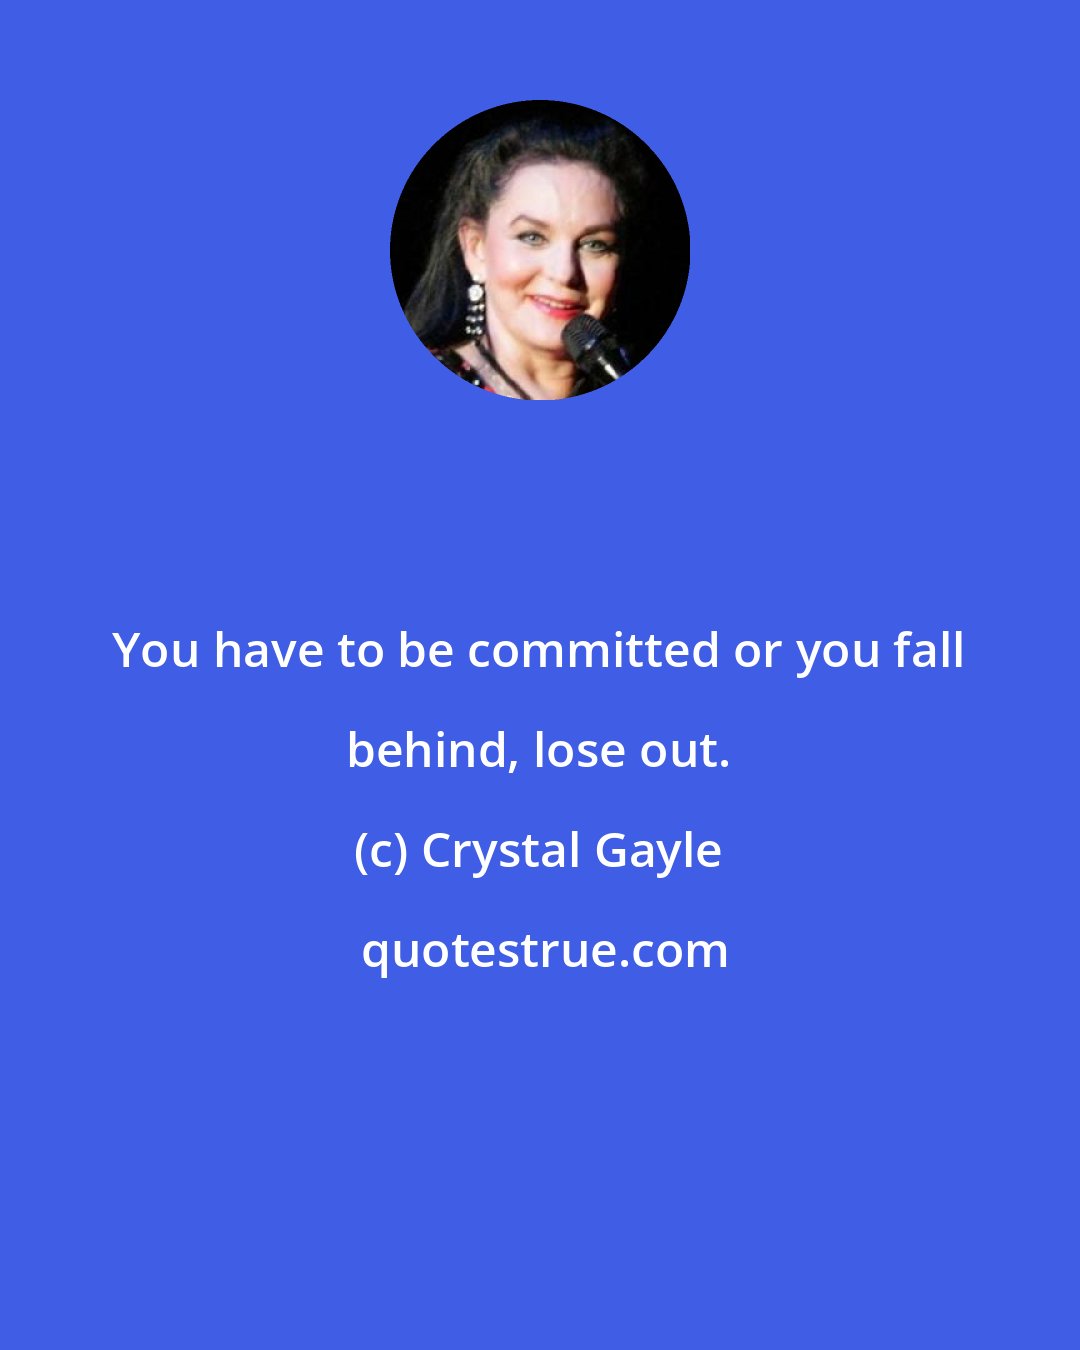 Crystal Gayle: You have to be committed or you fall behind, lose out.